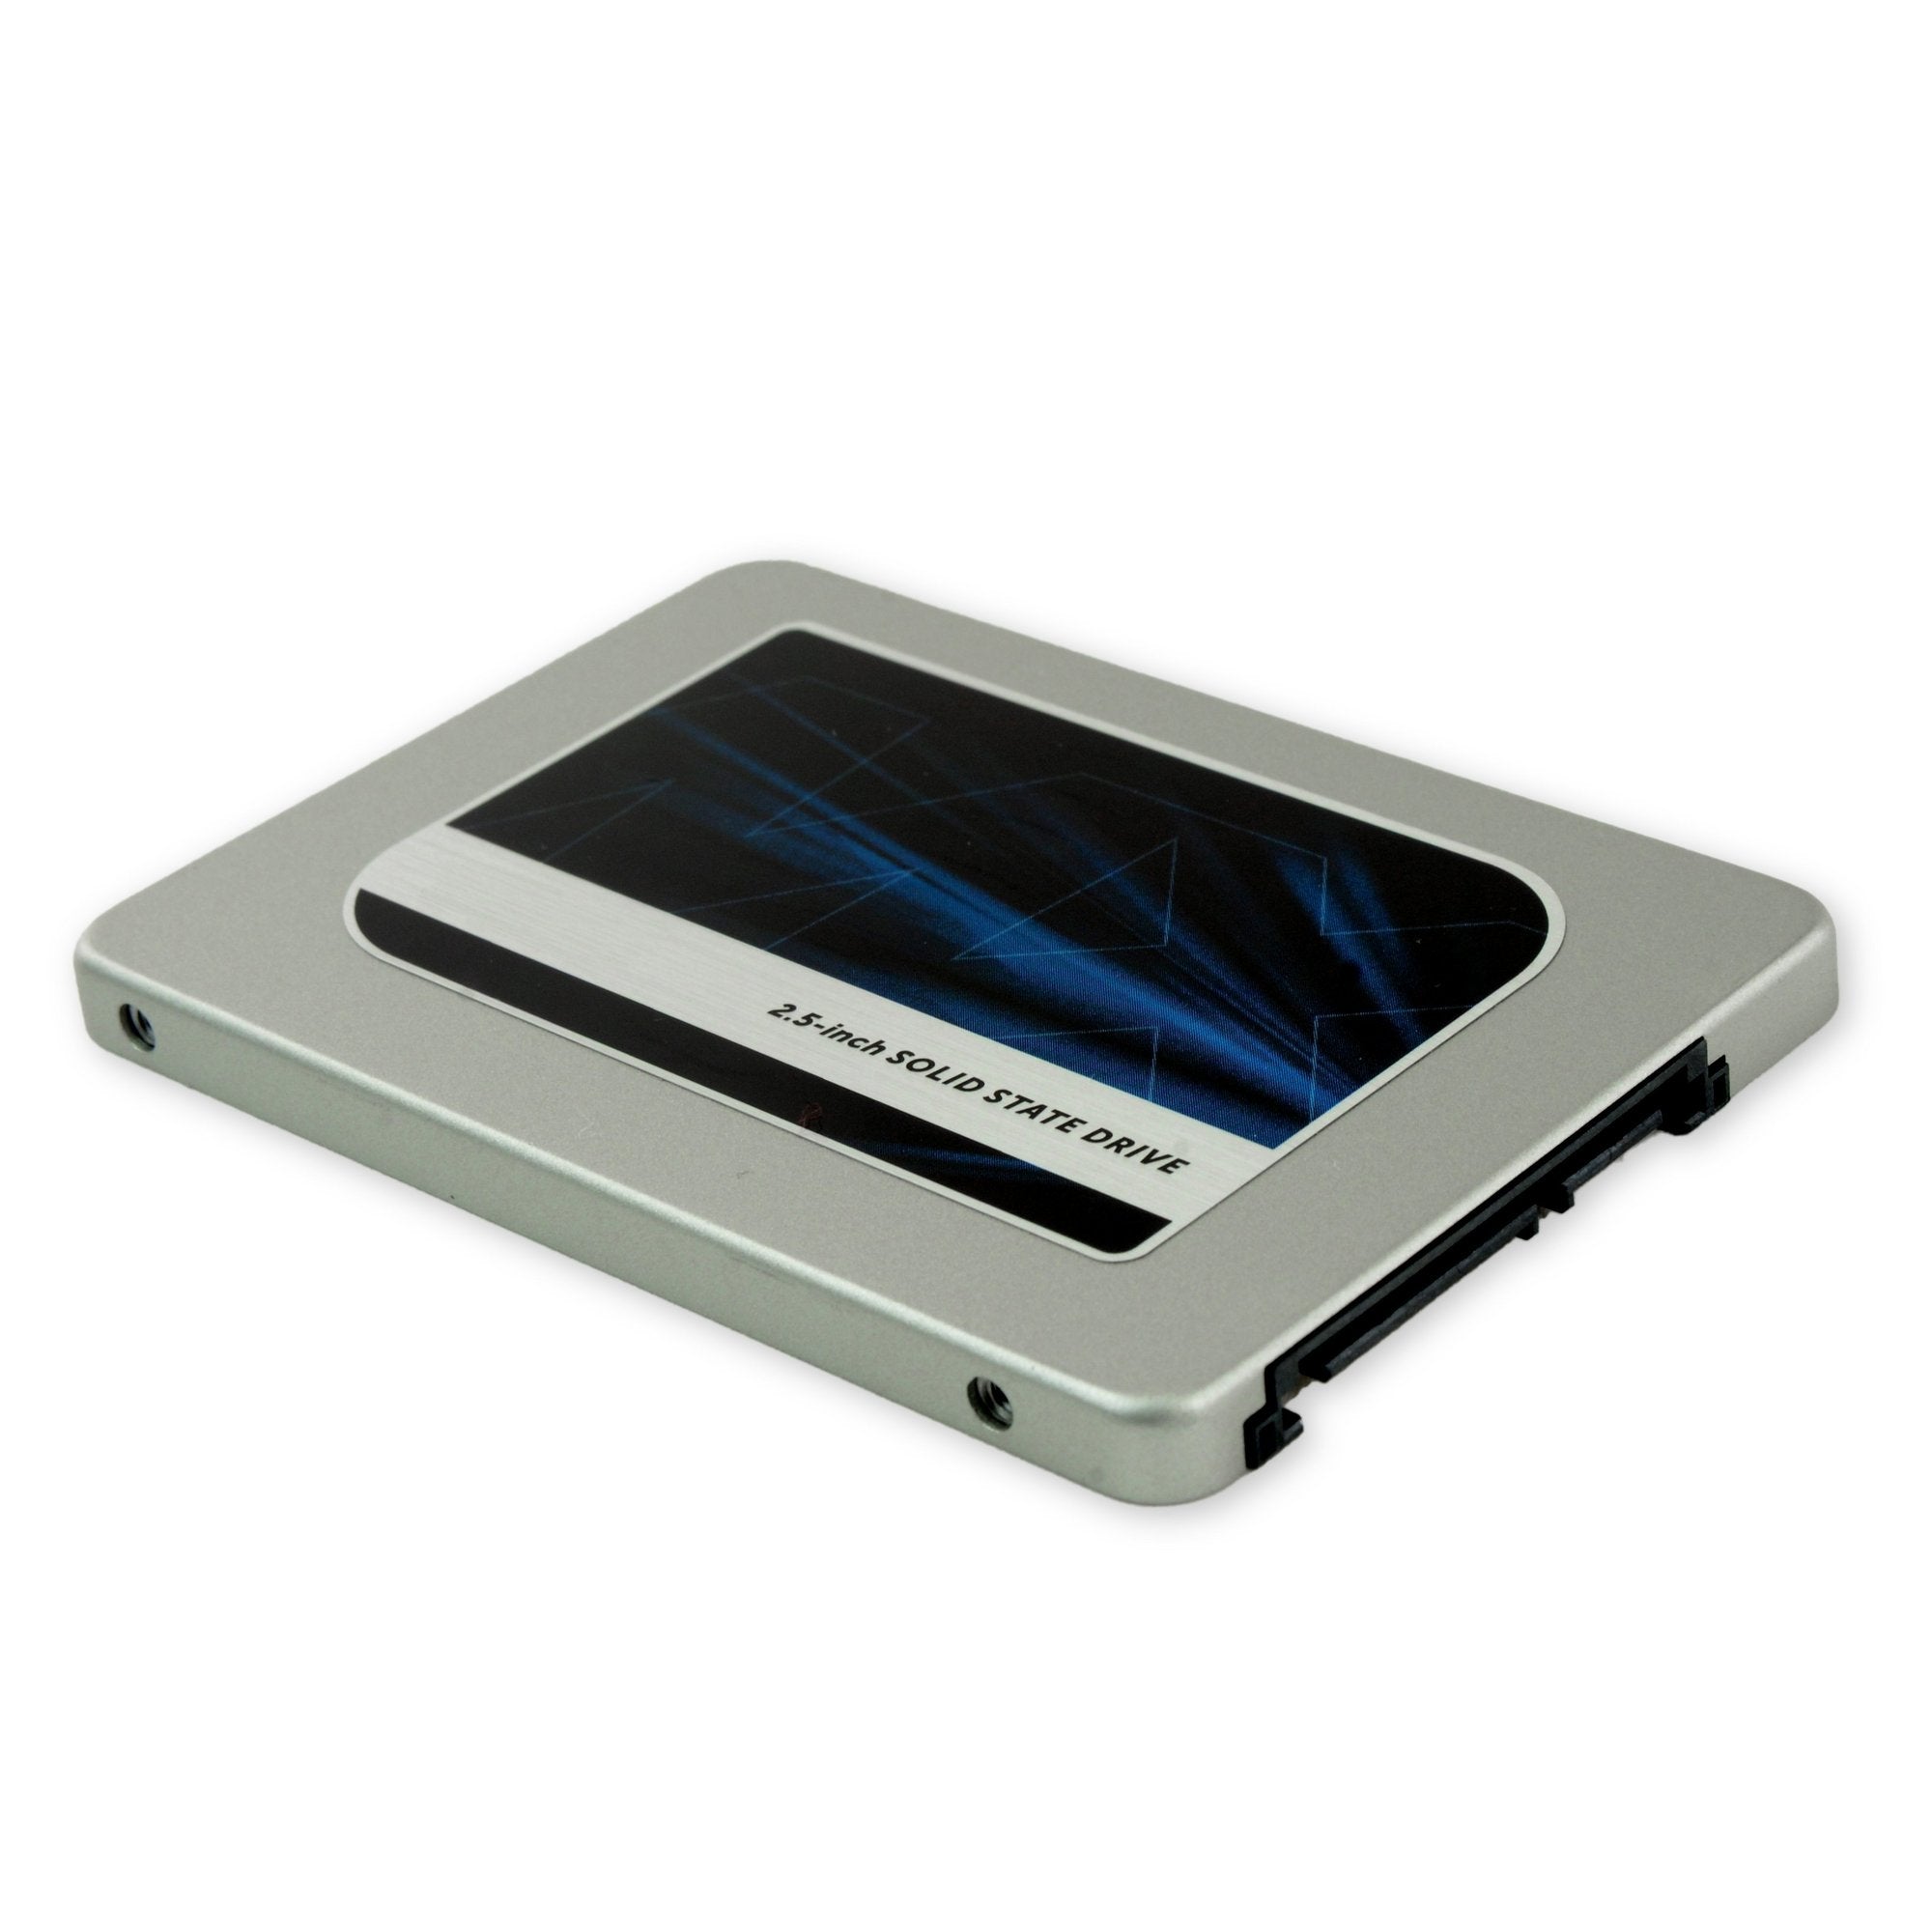 Crucial MX500 4 TB SSD New Part Only